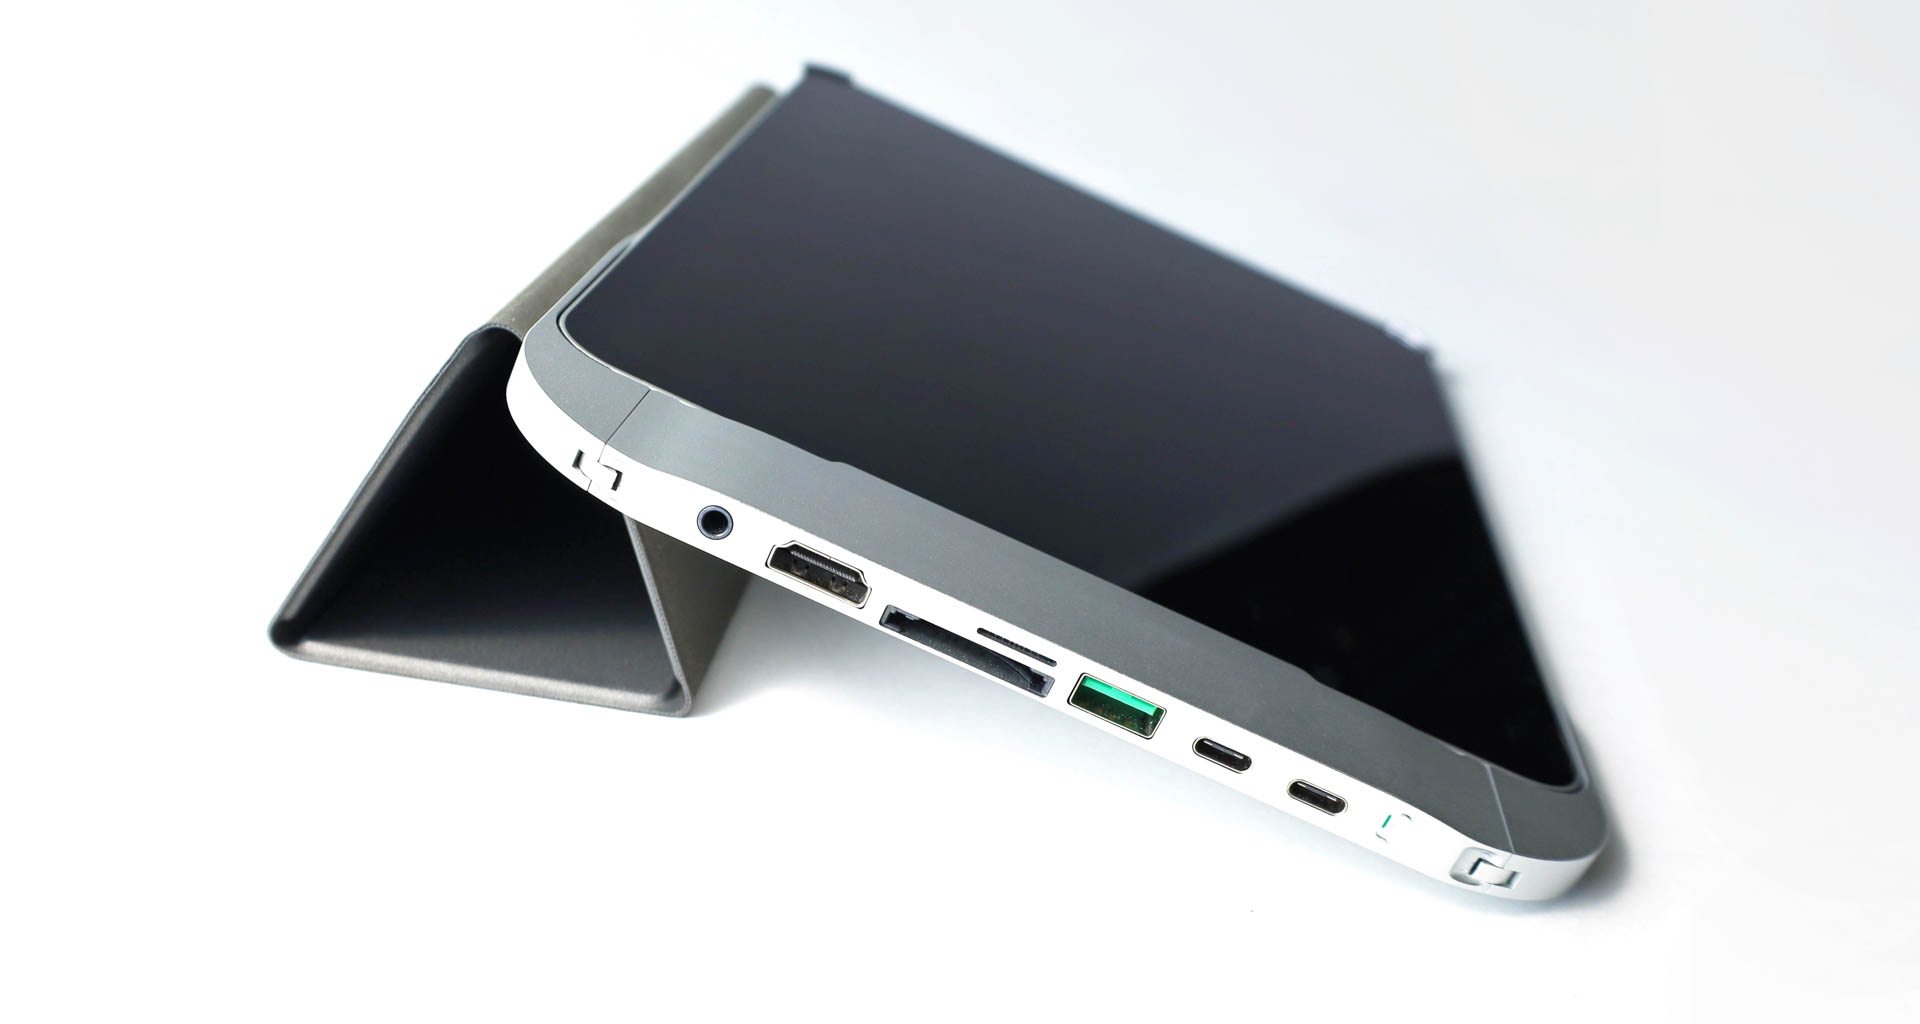 Ports, ports, and more ports. The Fledging Hubble for iPad integrated USB-C hub and case offers a broad range of connectivity. Image: Fledging.